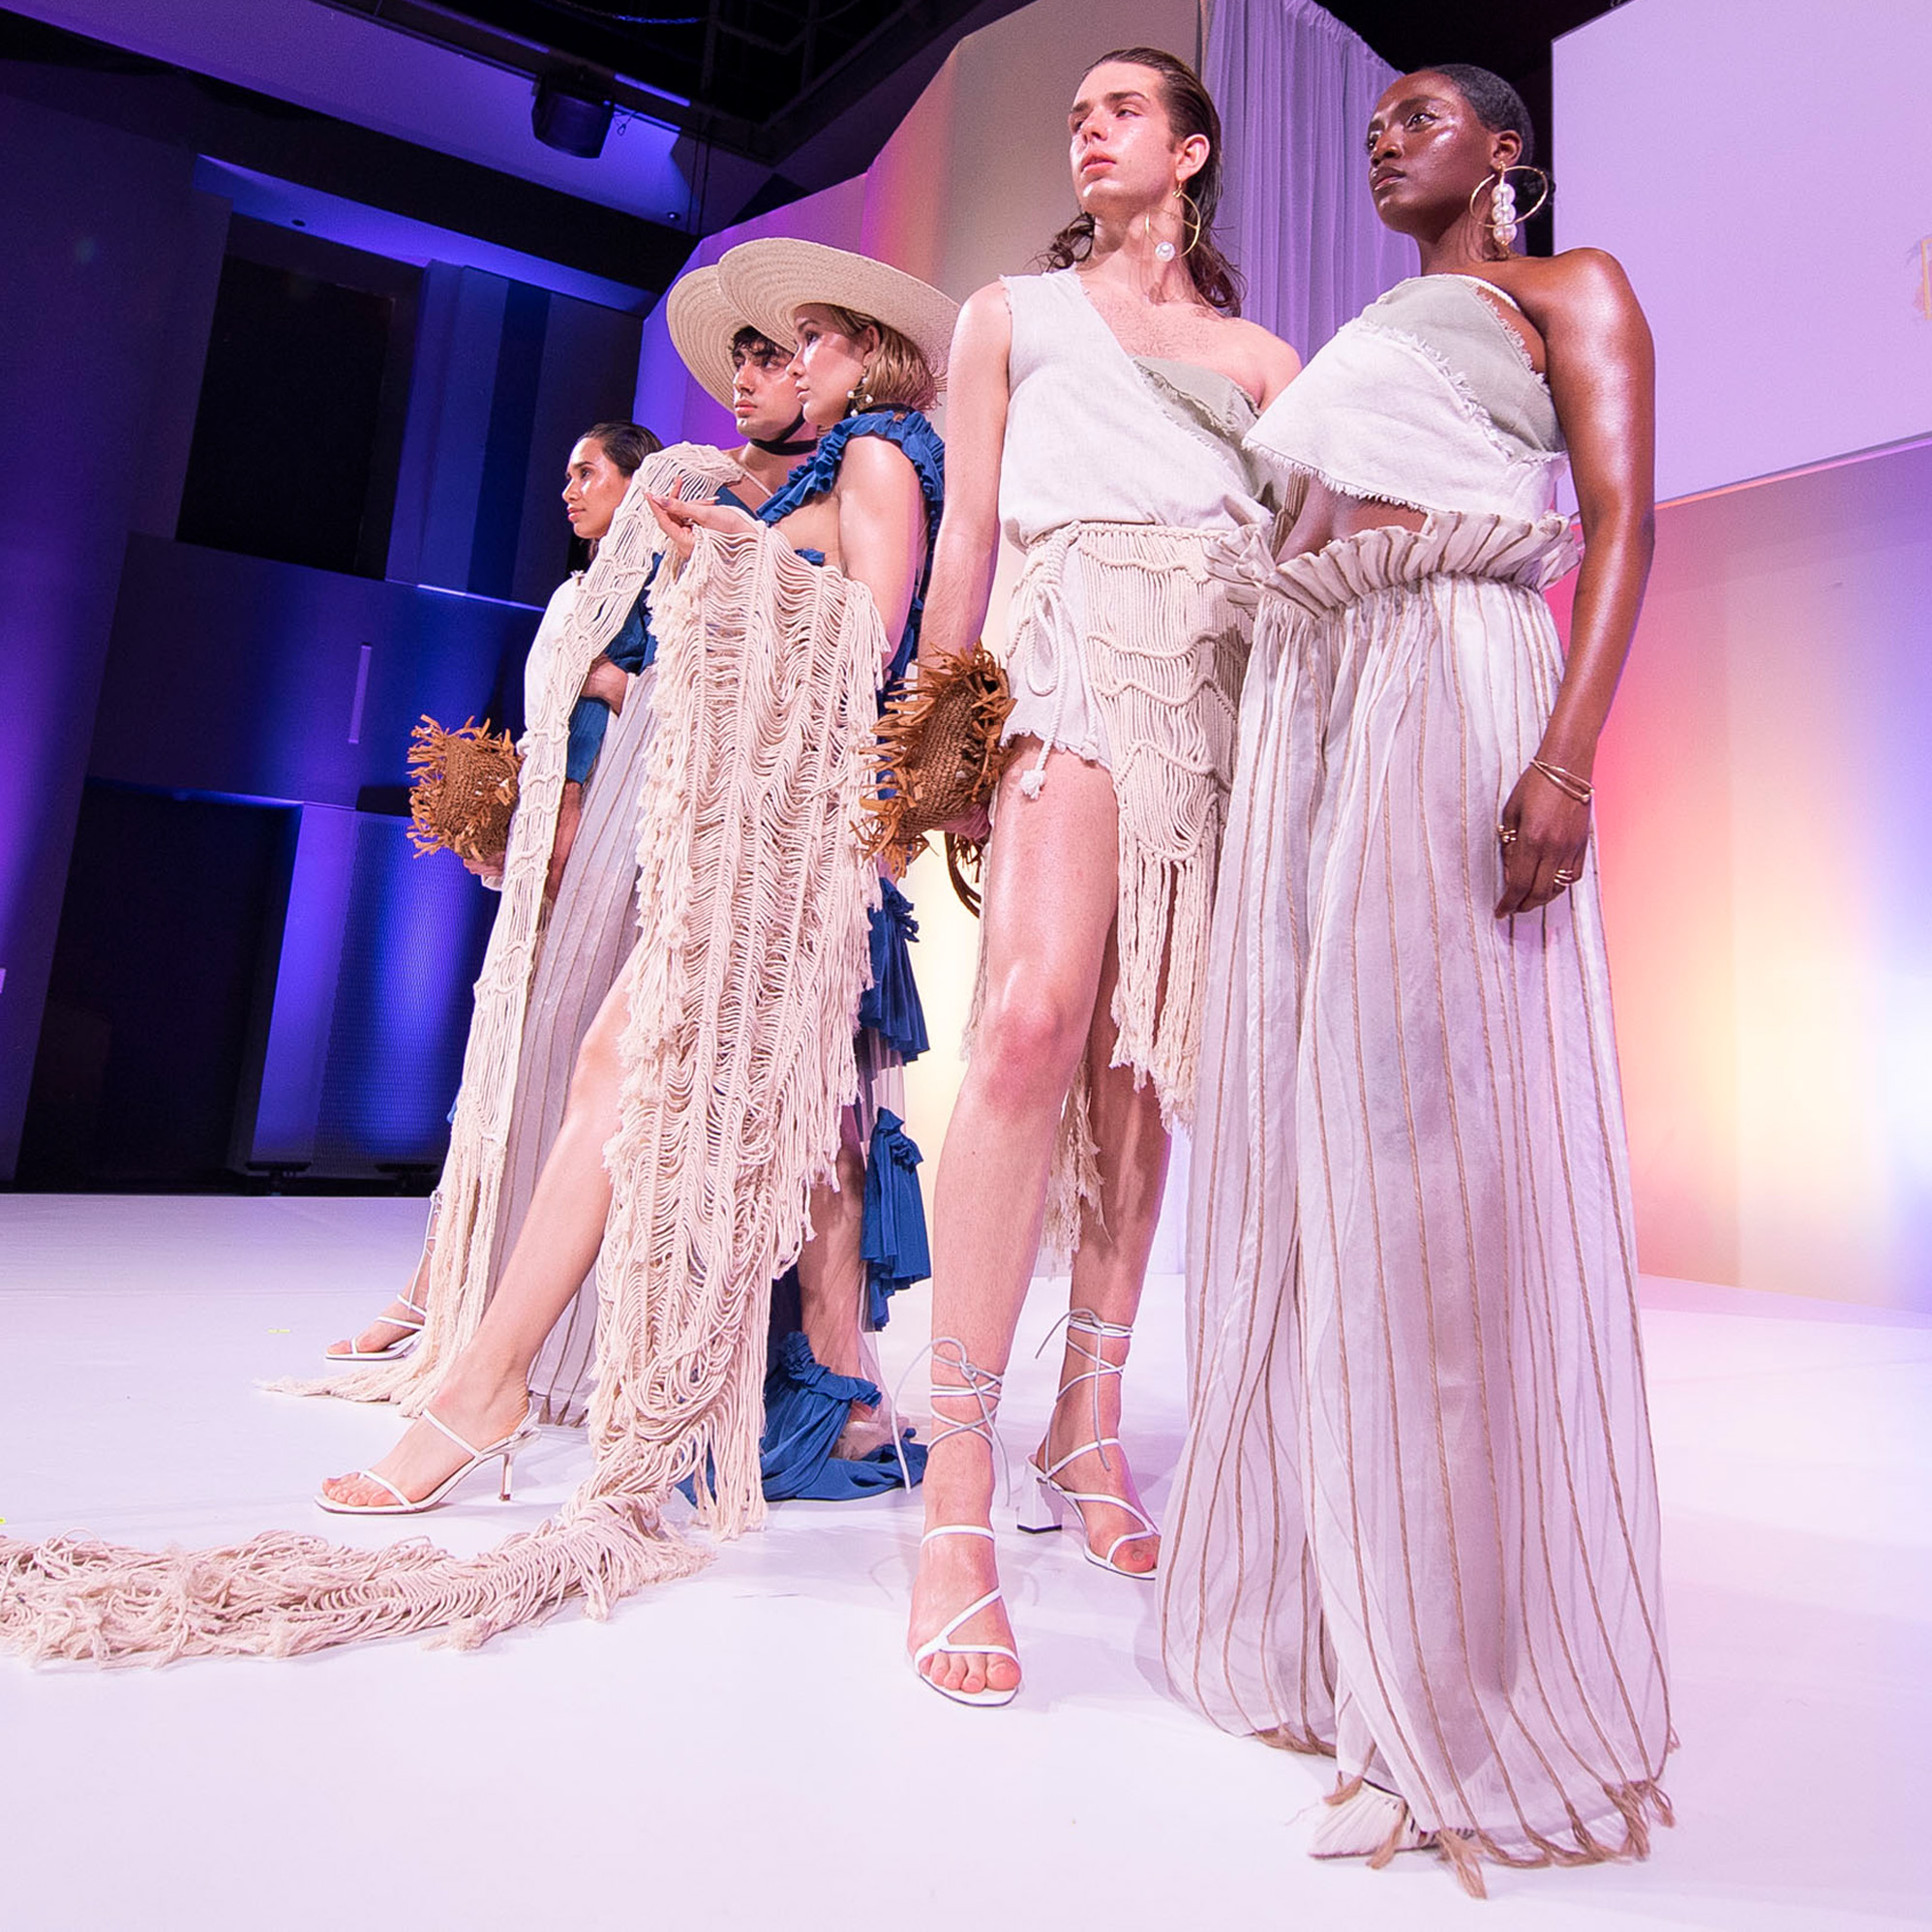 Models posed on runway during student fashion show